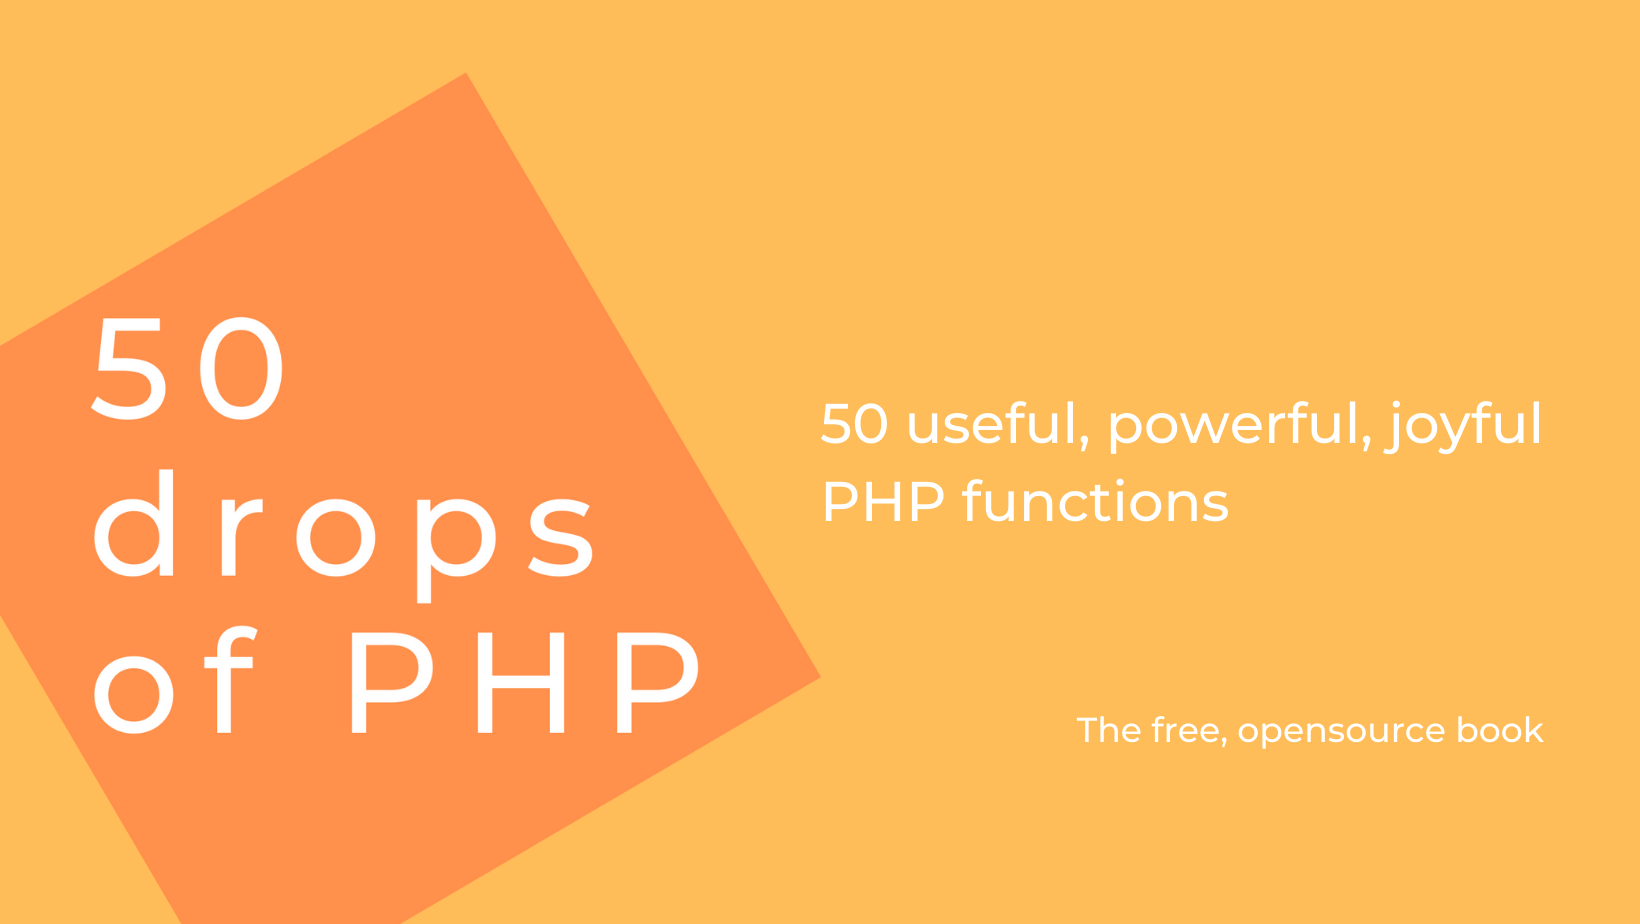 50 drops of PHP book